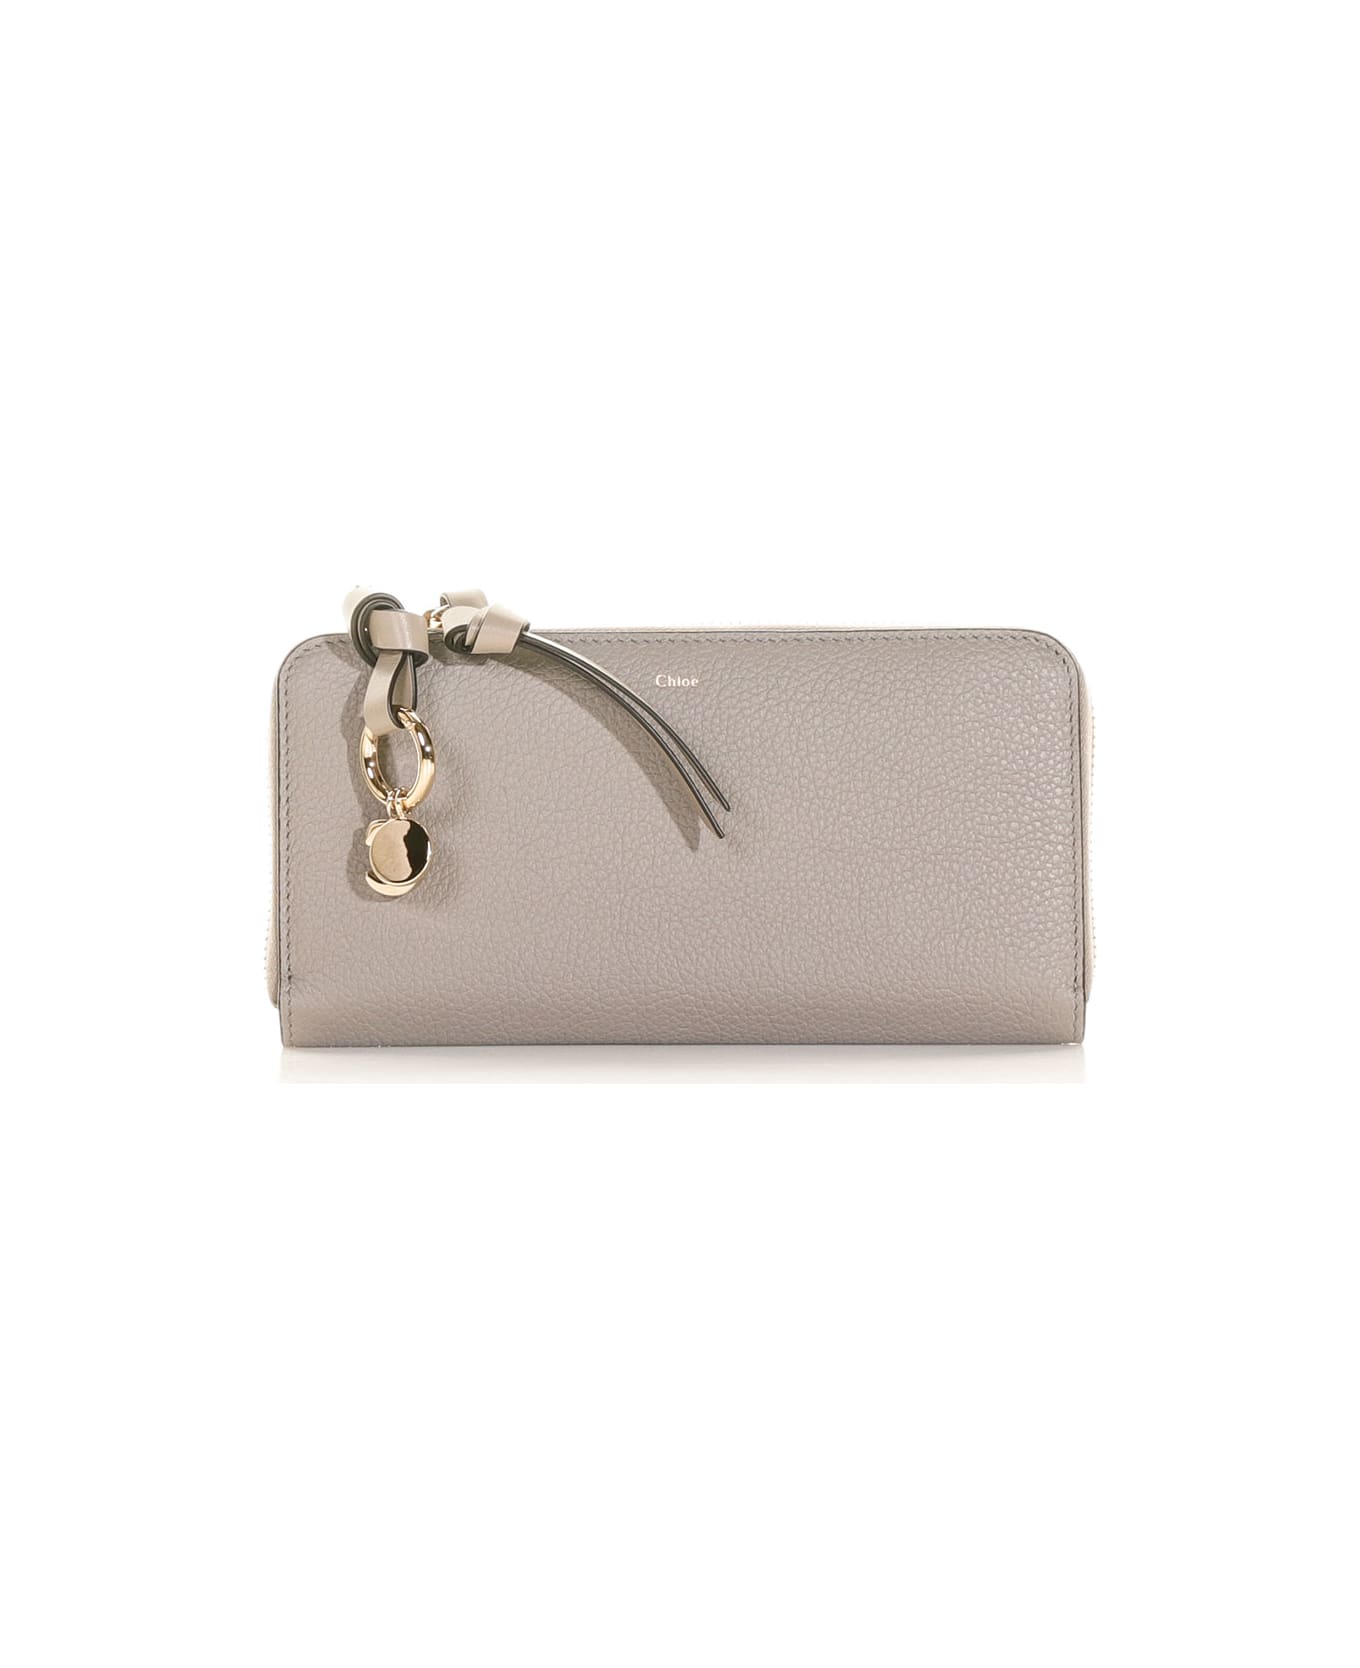 Chloé Full Zip Leather Wallet - CASHMERE GREY